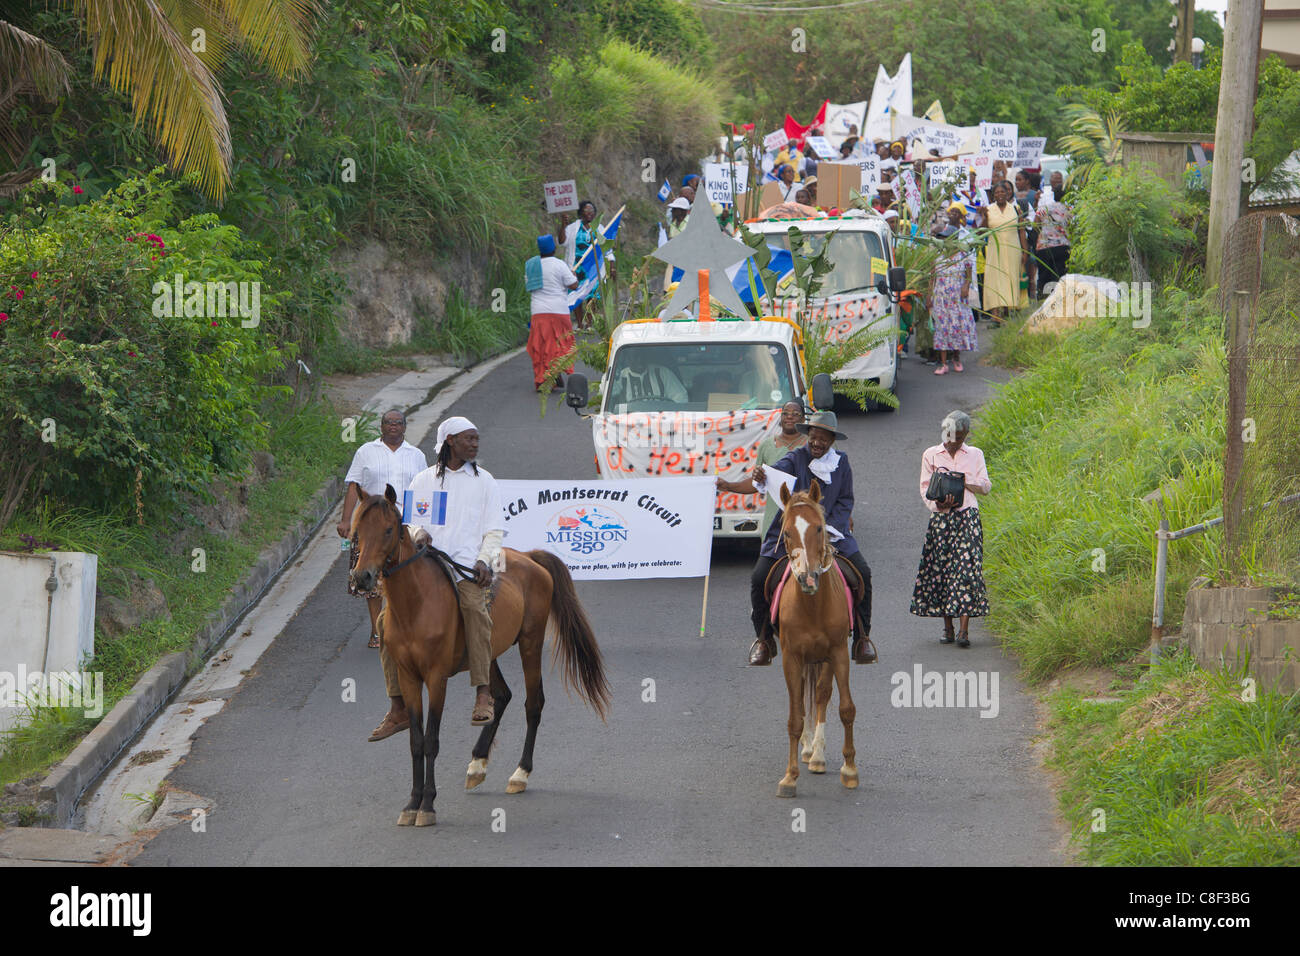 Costumed procession to celebrate 250 years of Methodism on the island, Montserrat Stock Photo